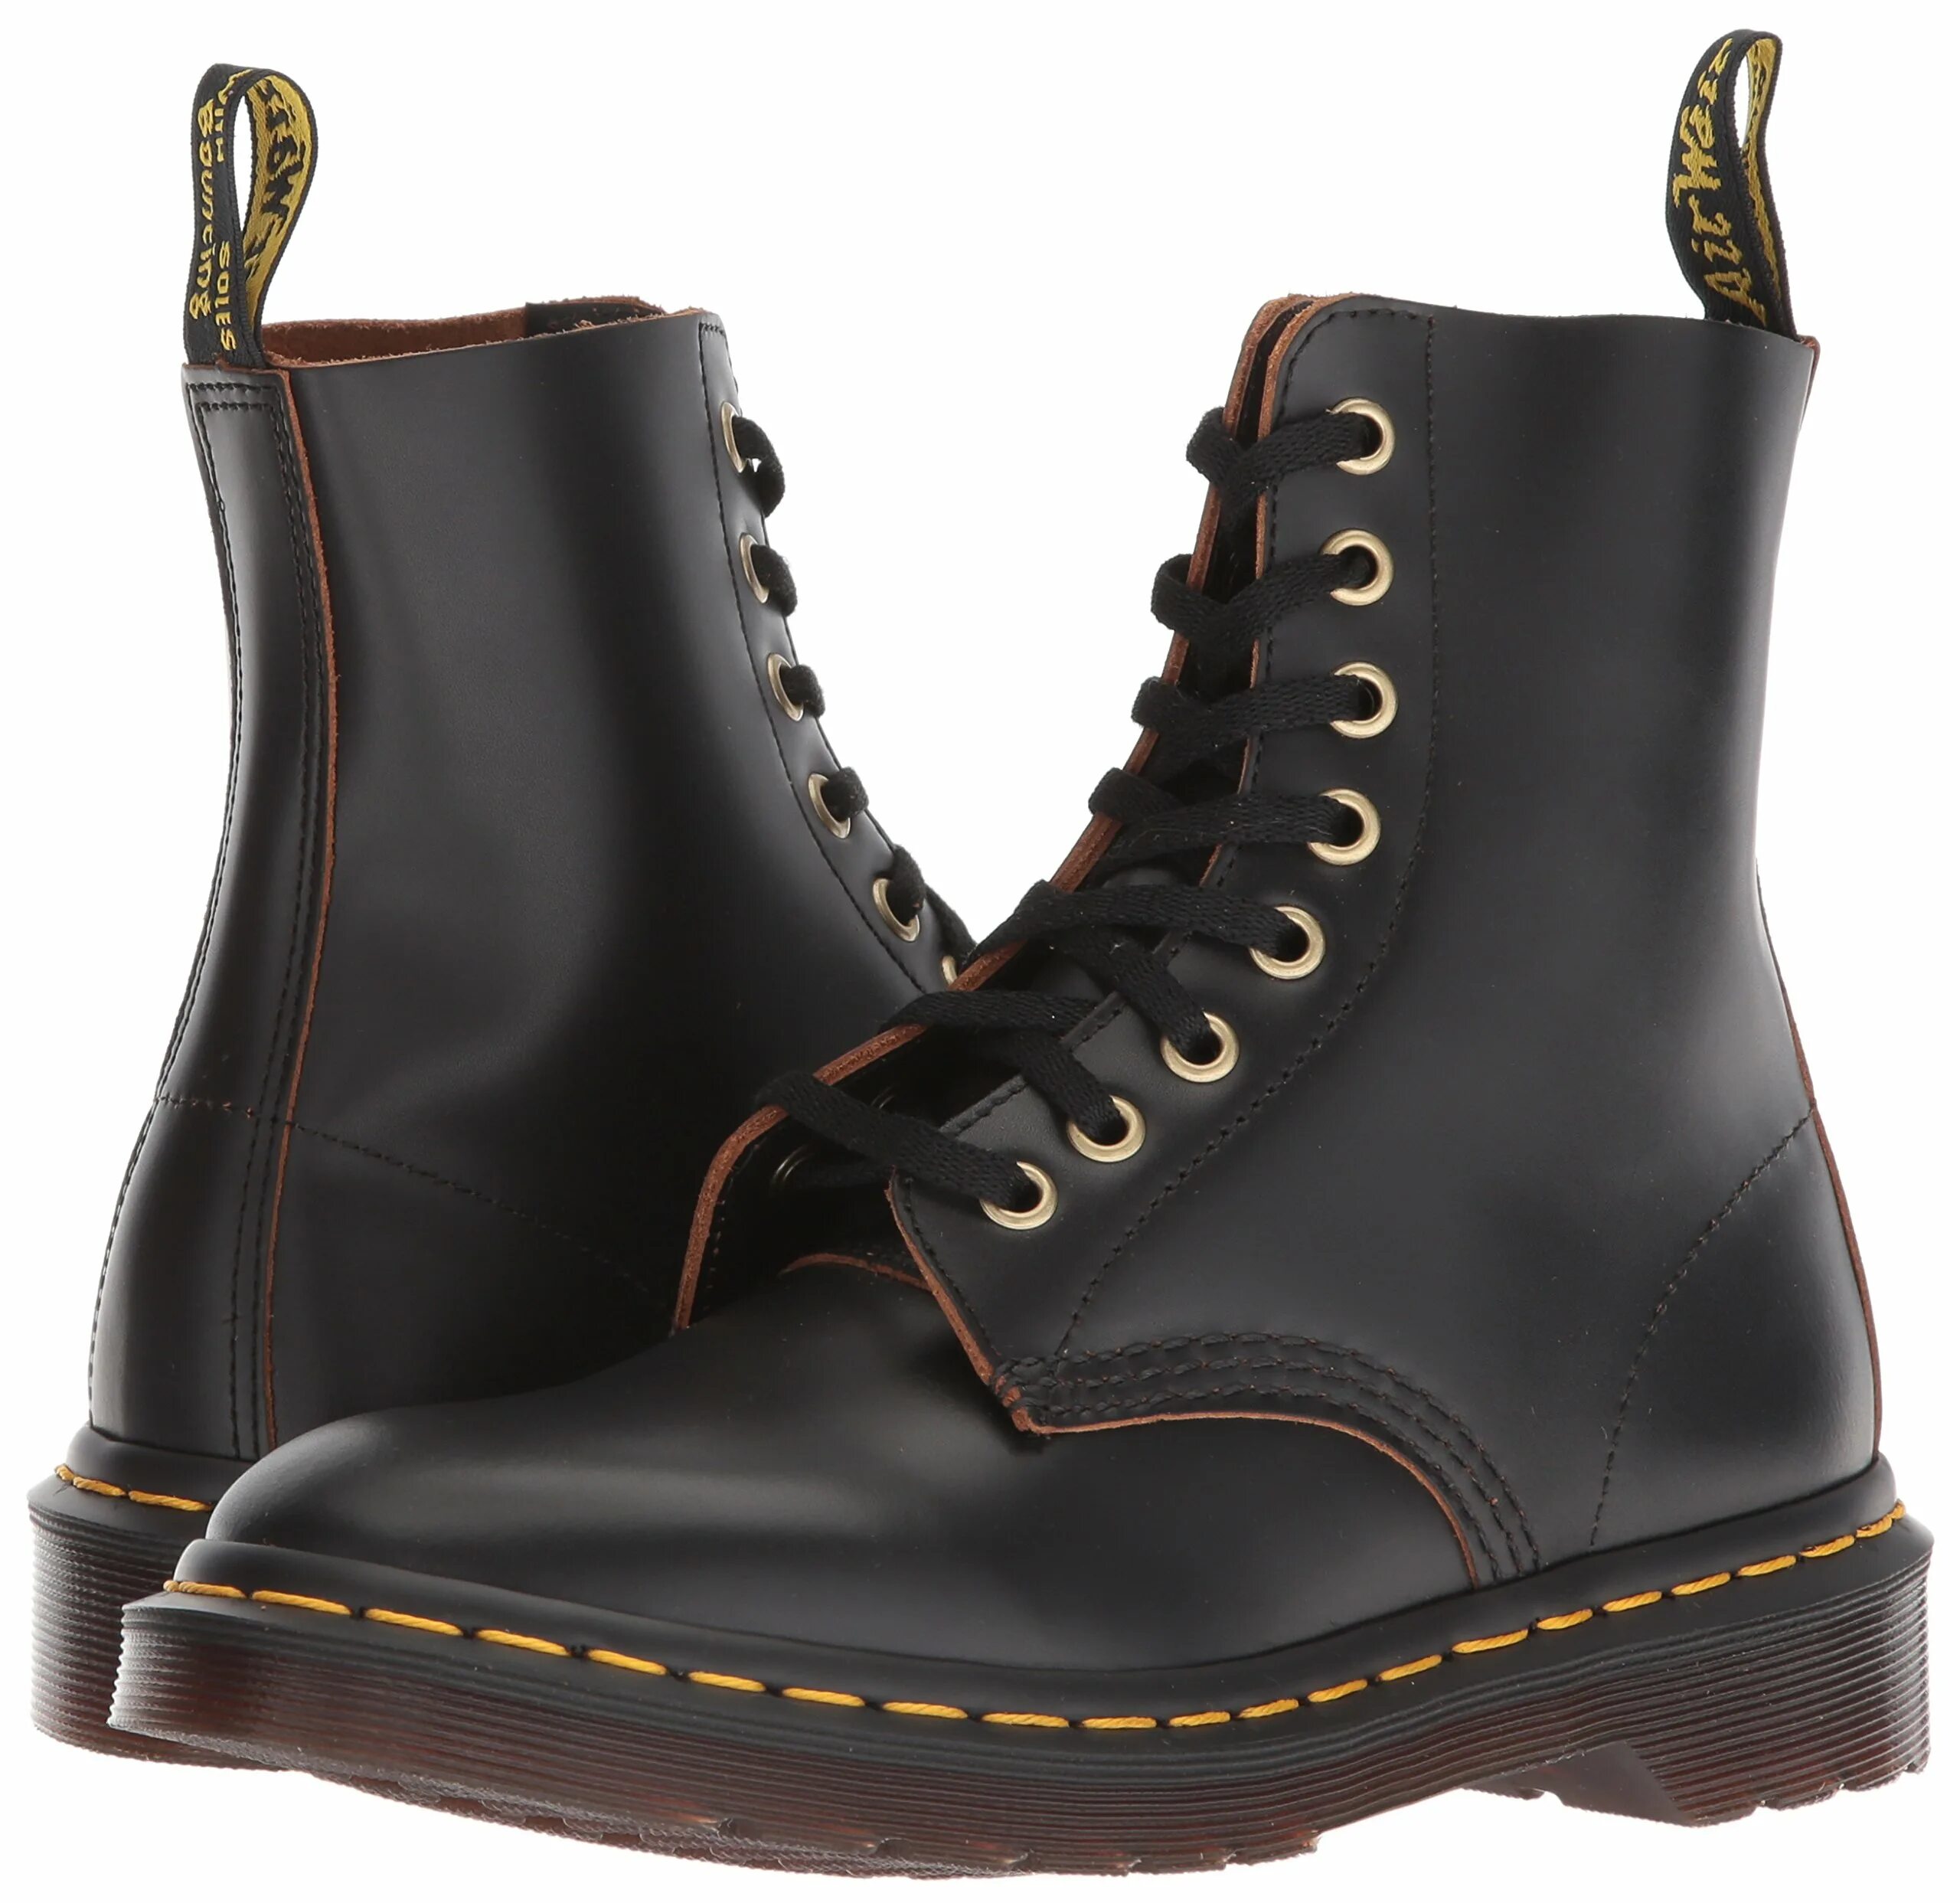 Dr Martens Antique Temperley 1460. Dr Martens 1460 Pascal подошва. Dr.Martens 1416 Pascal. Dr. Marten’s 1460 Vintage smooth Leather Lace up Boots.. Dr martens pascal